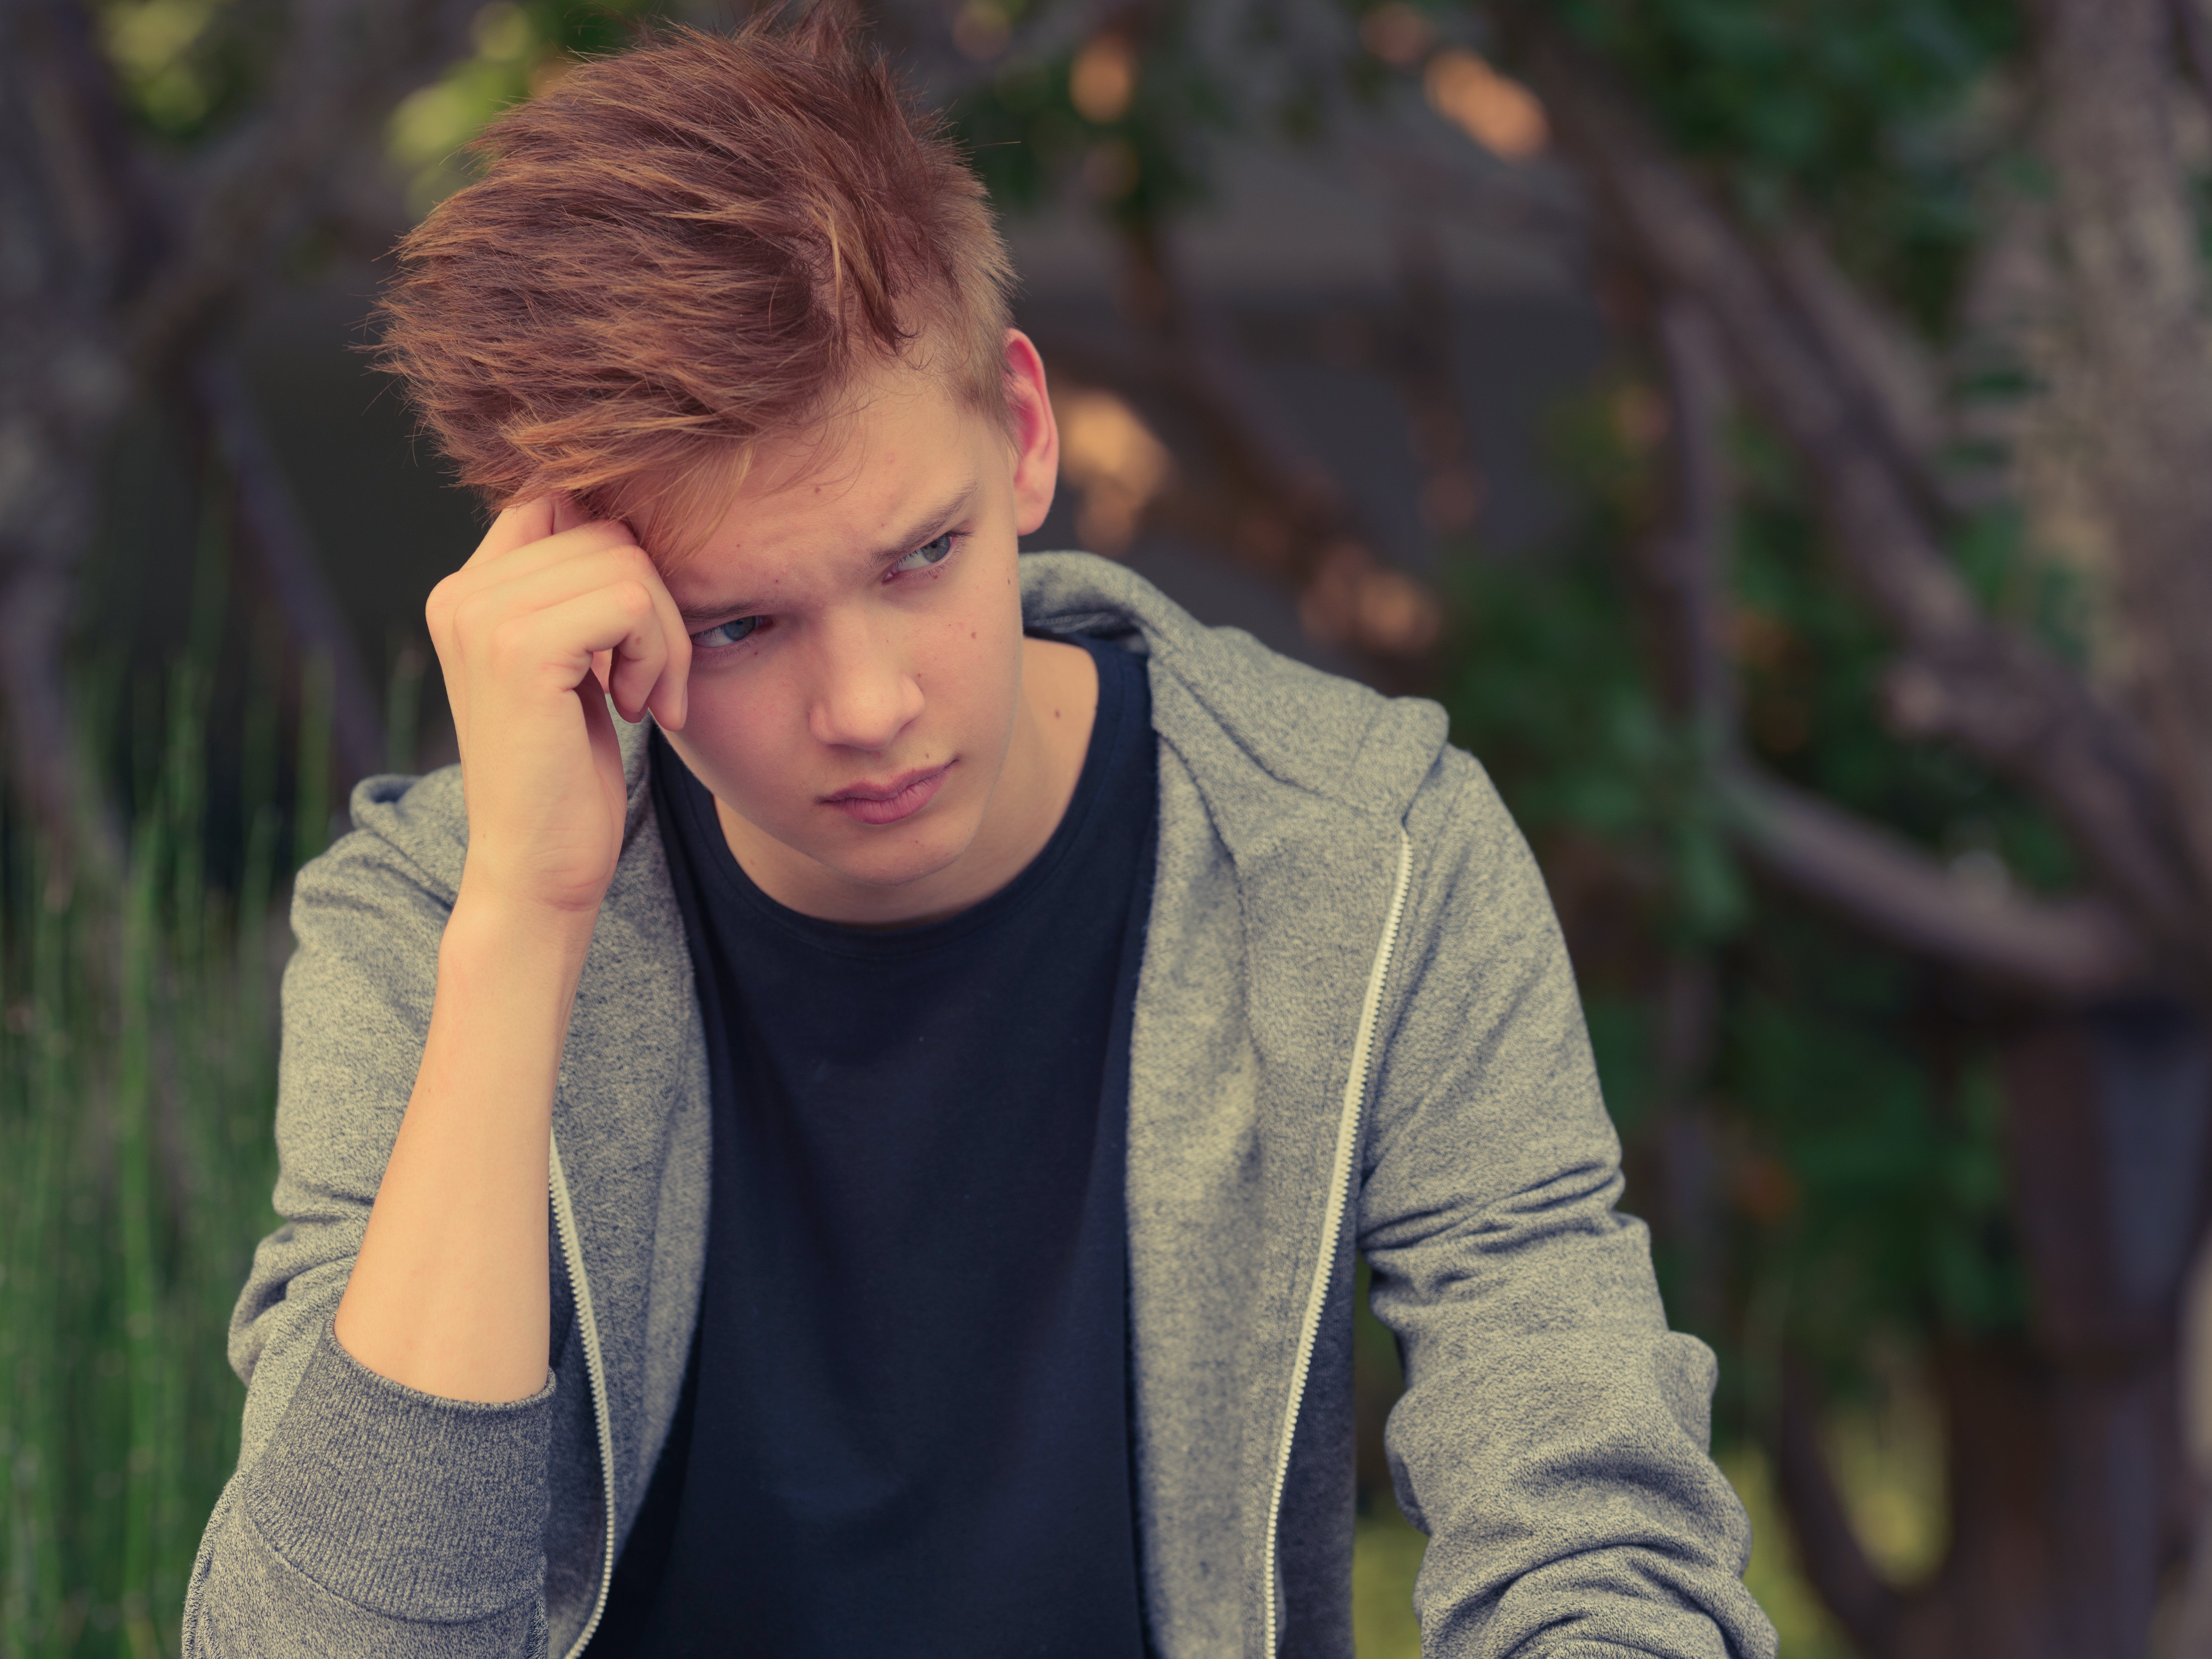 An upset teenager sitting with his hand against his head | Source: Shutterstock